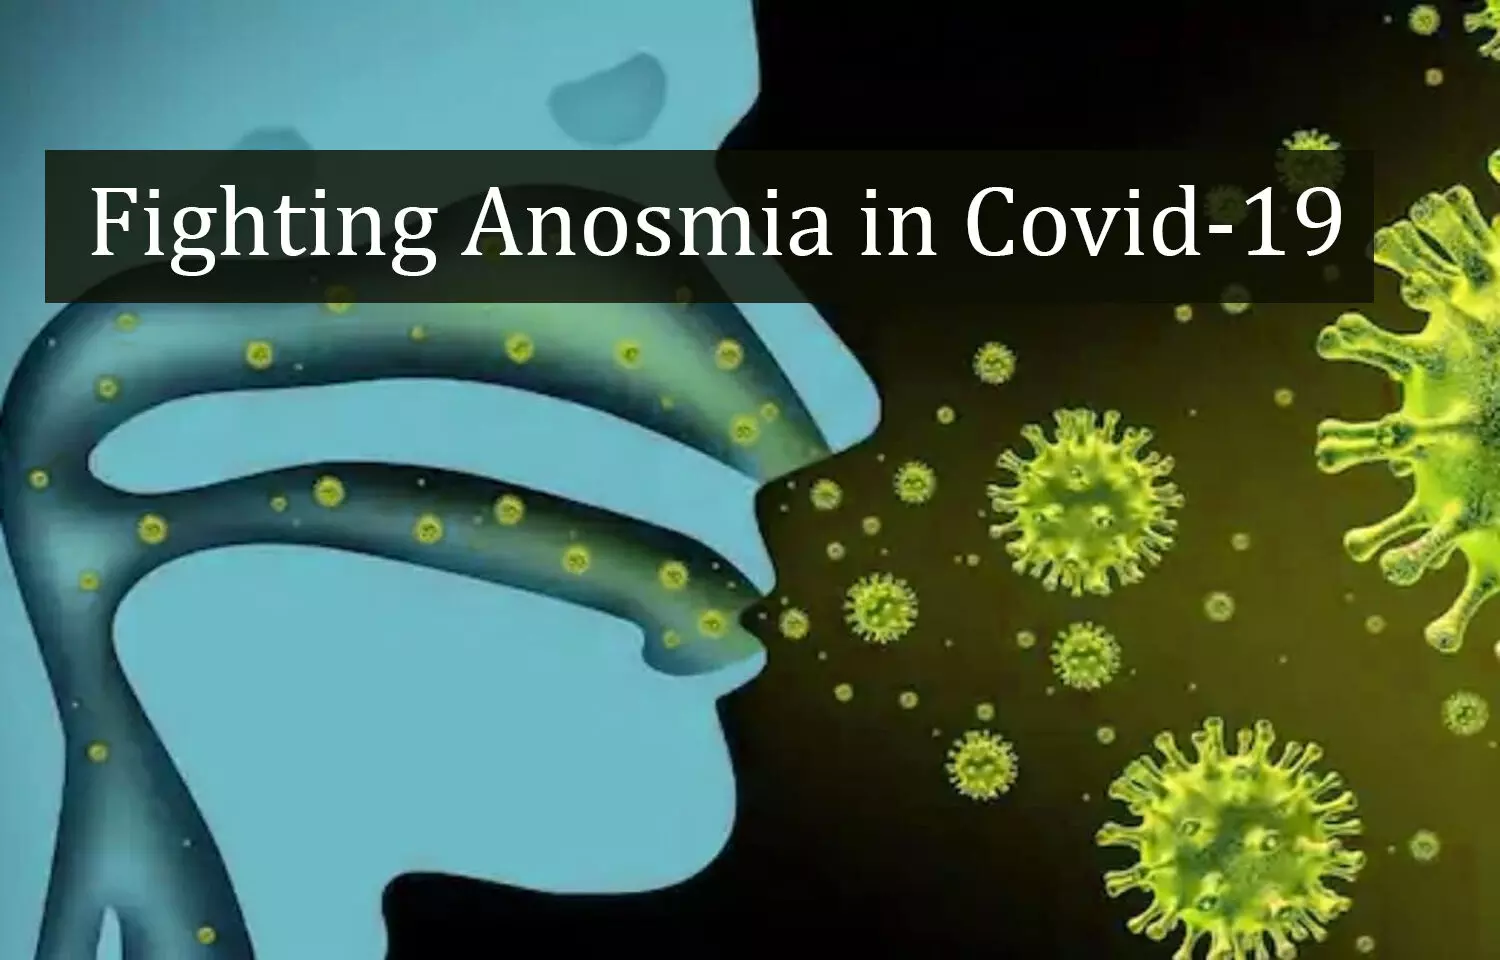 Nasal corticosteroid questionable for treating anosmia due to COVID-19, Study reveals